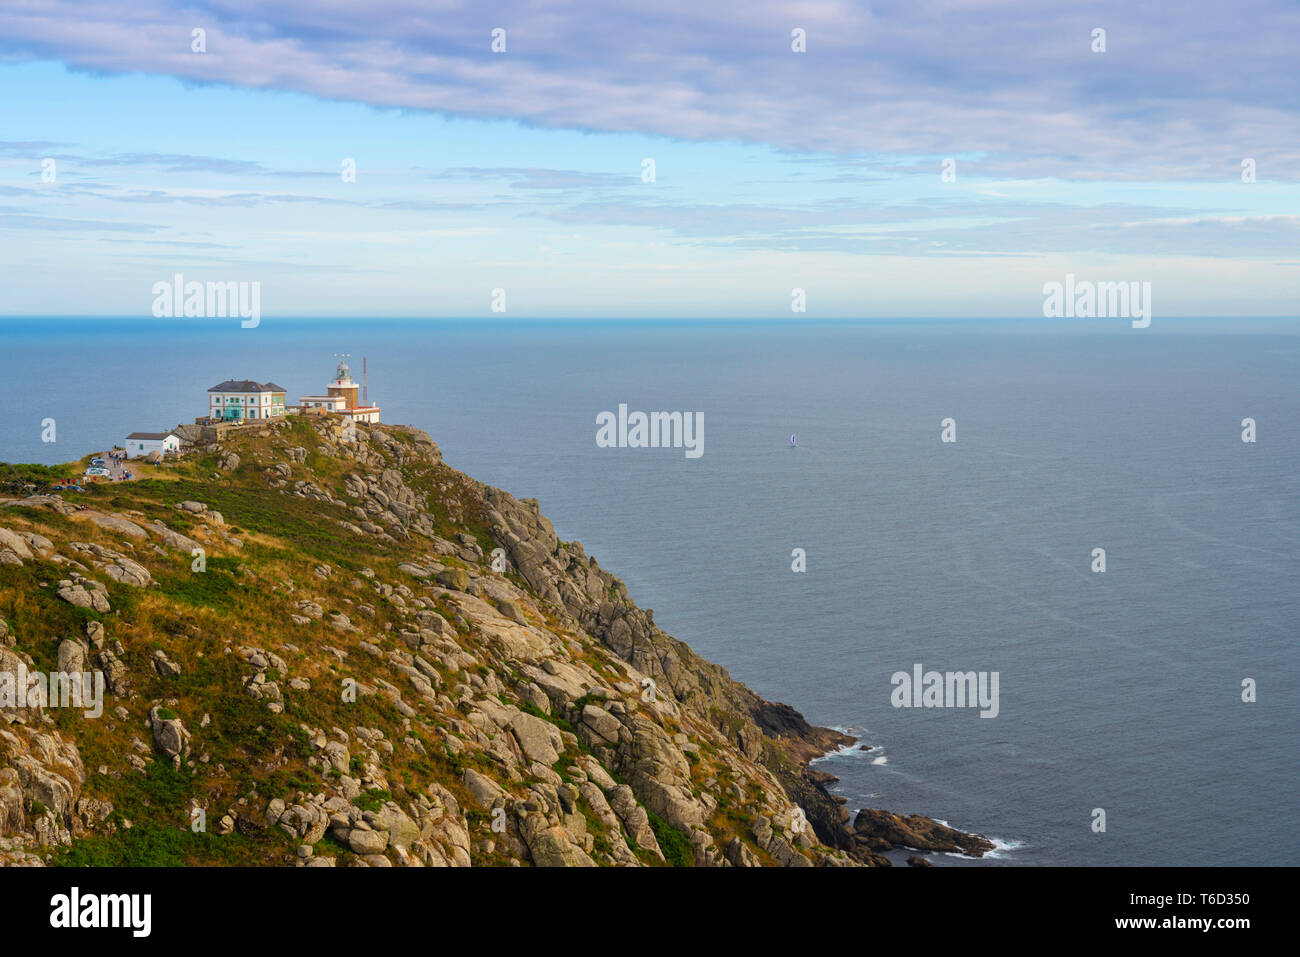 Spain, Galicia, Finisterre, Finisterre lighthouse Stock Photo